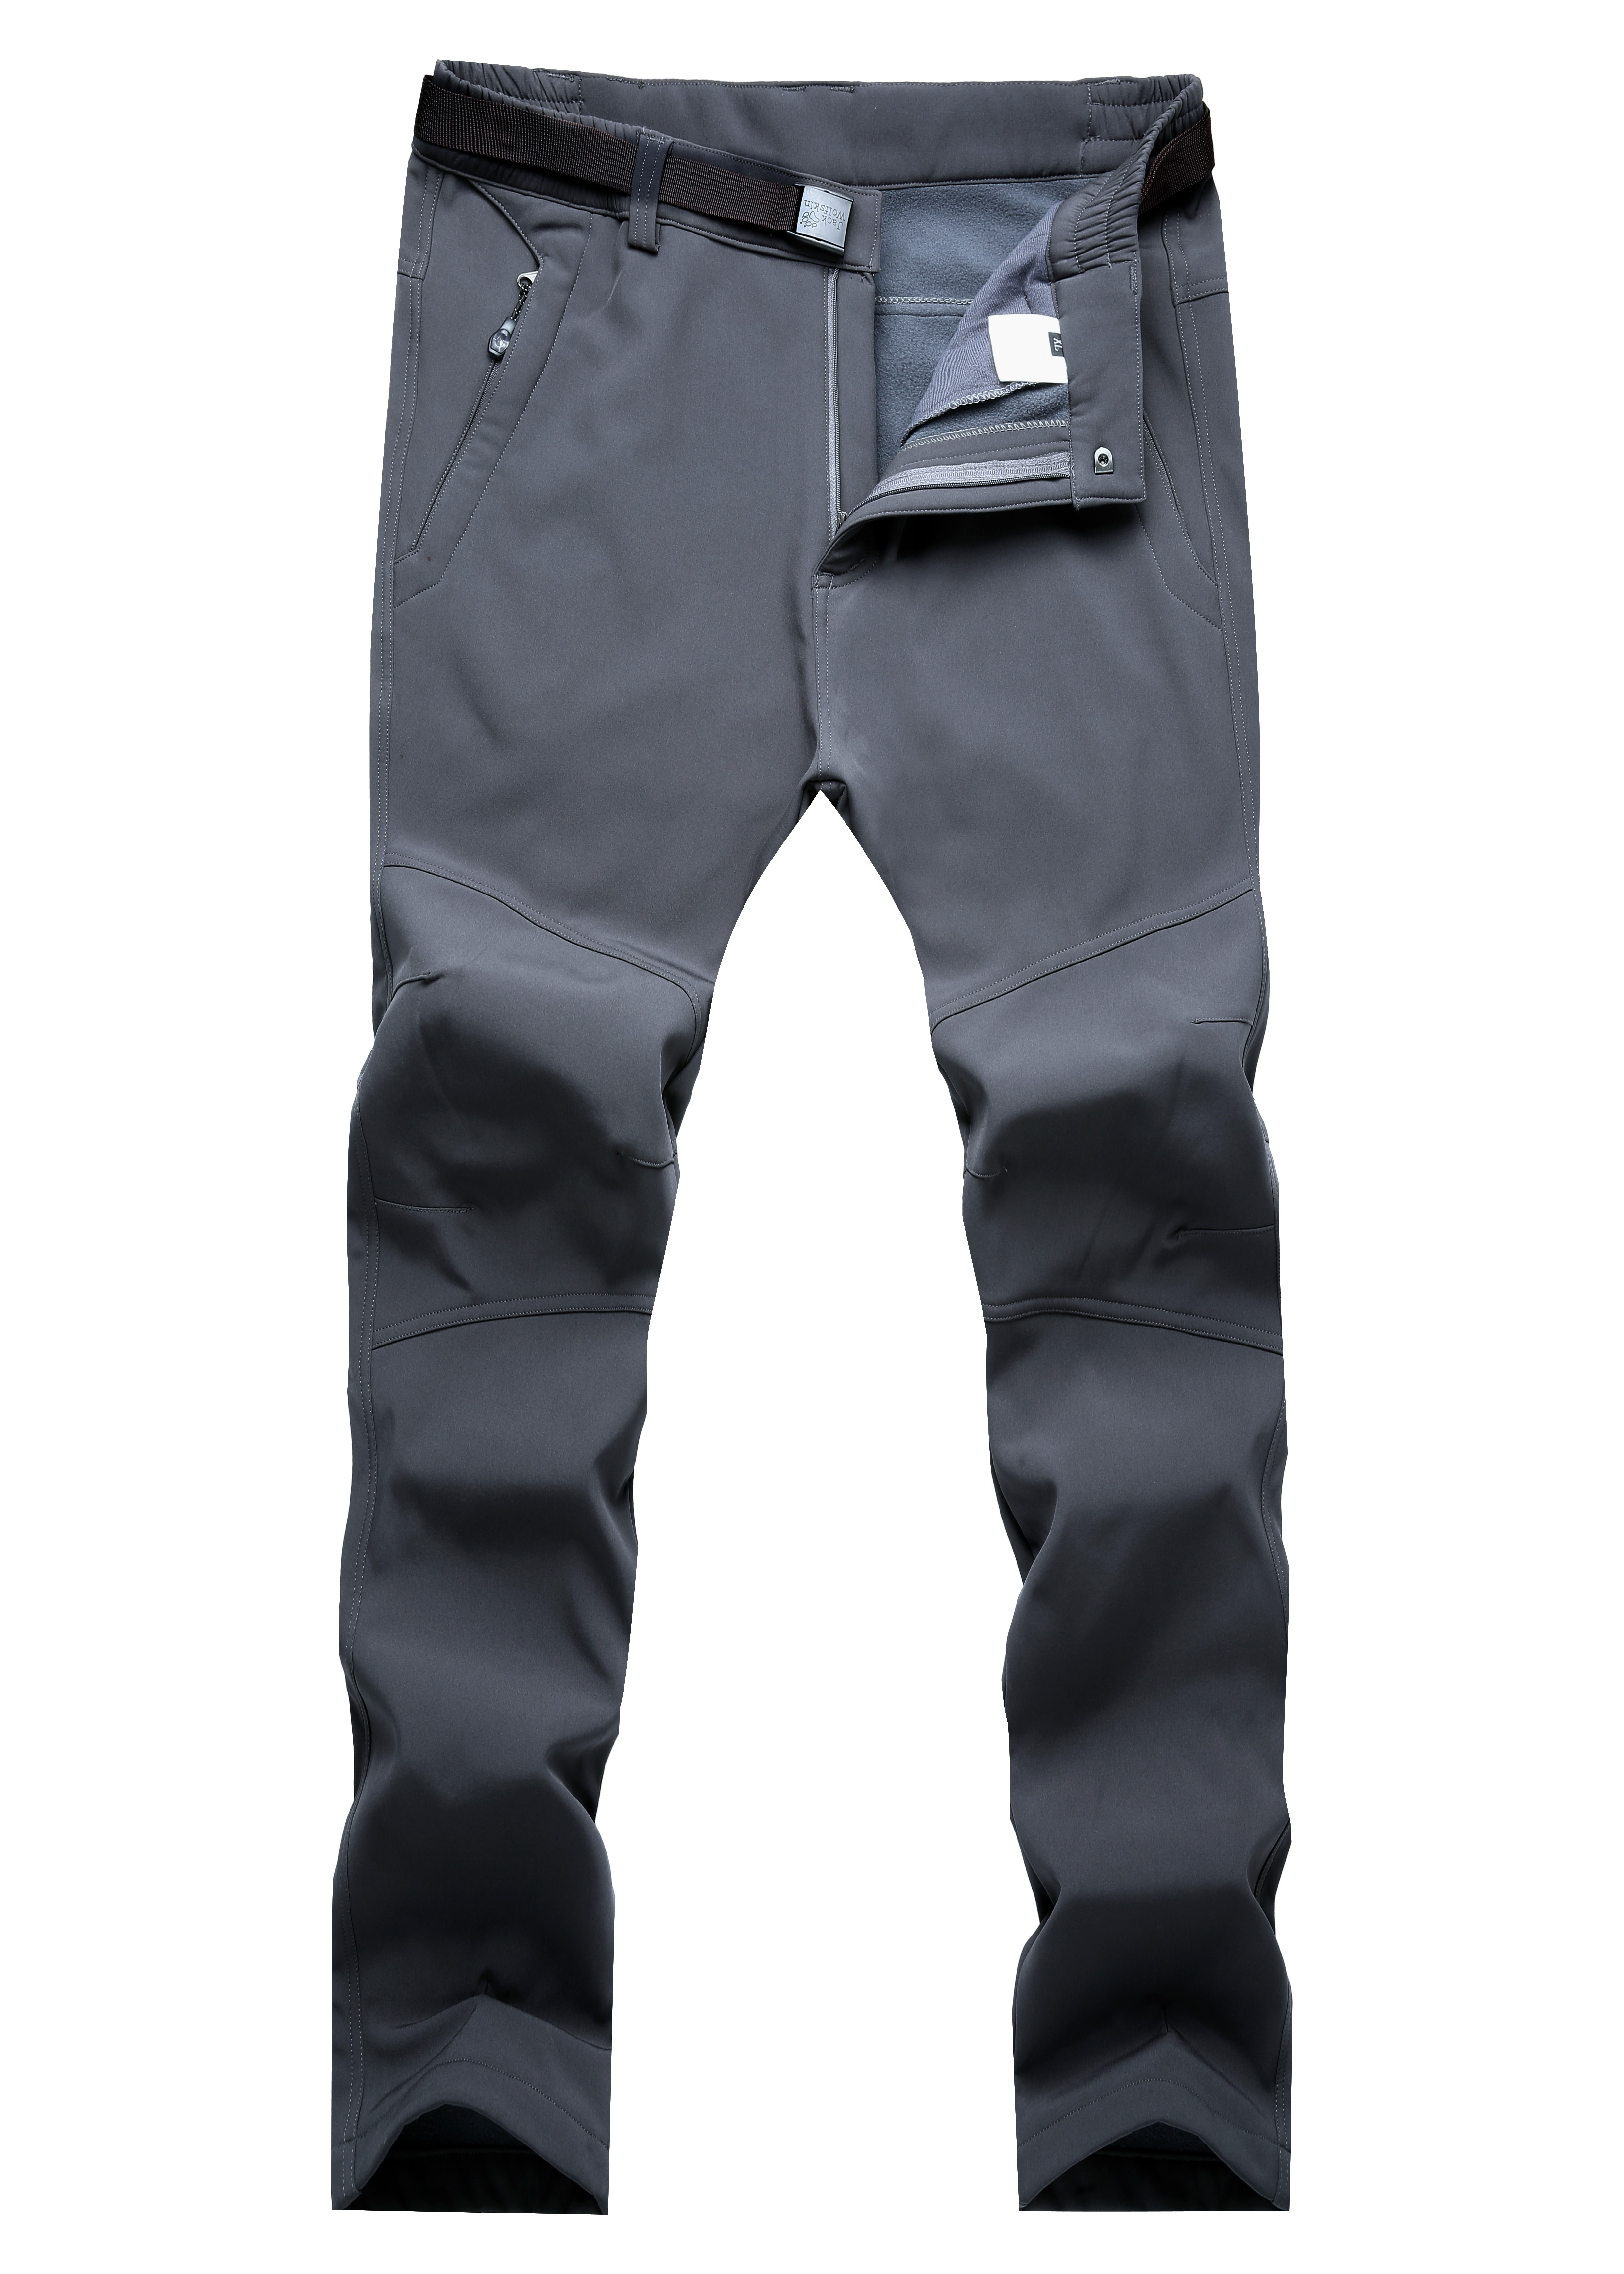 Stay Warm Dry On The Slopes Unisex Thermal Skiing Pants With